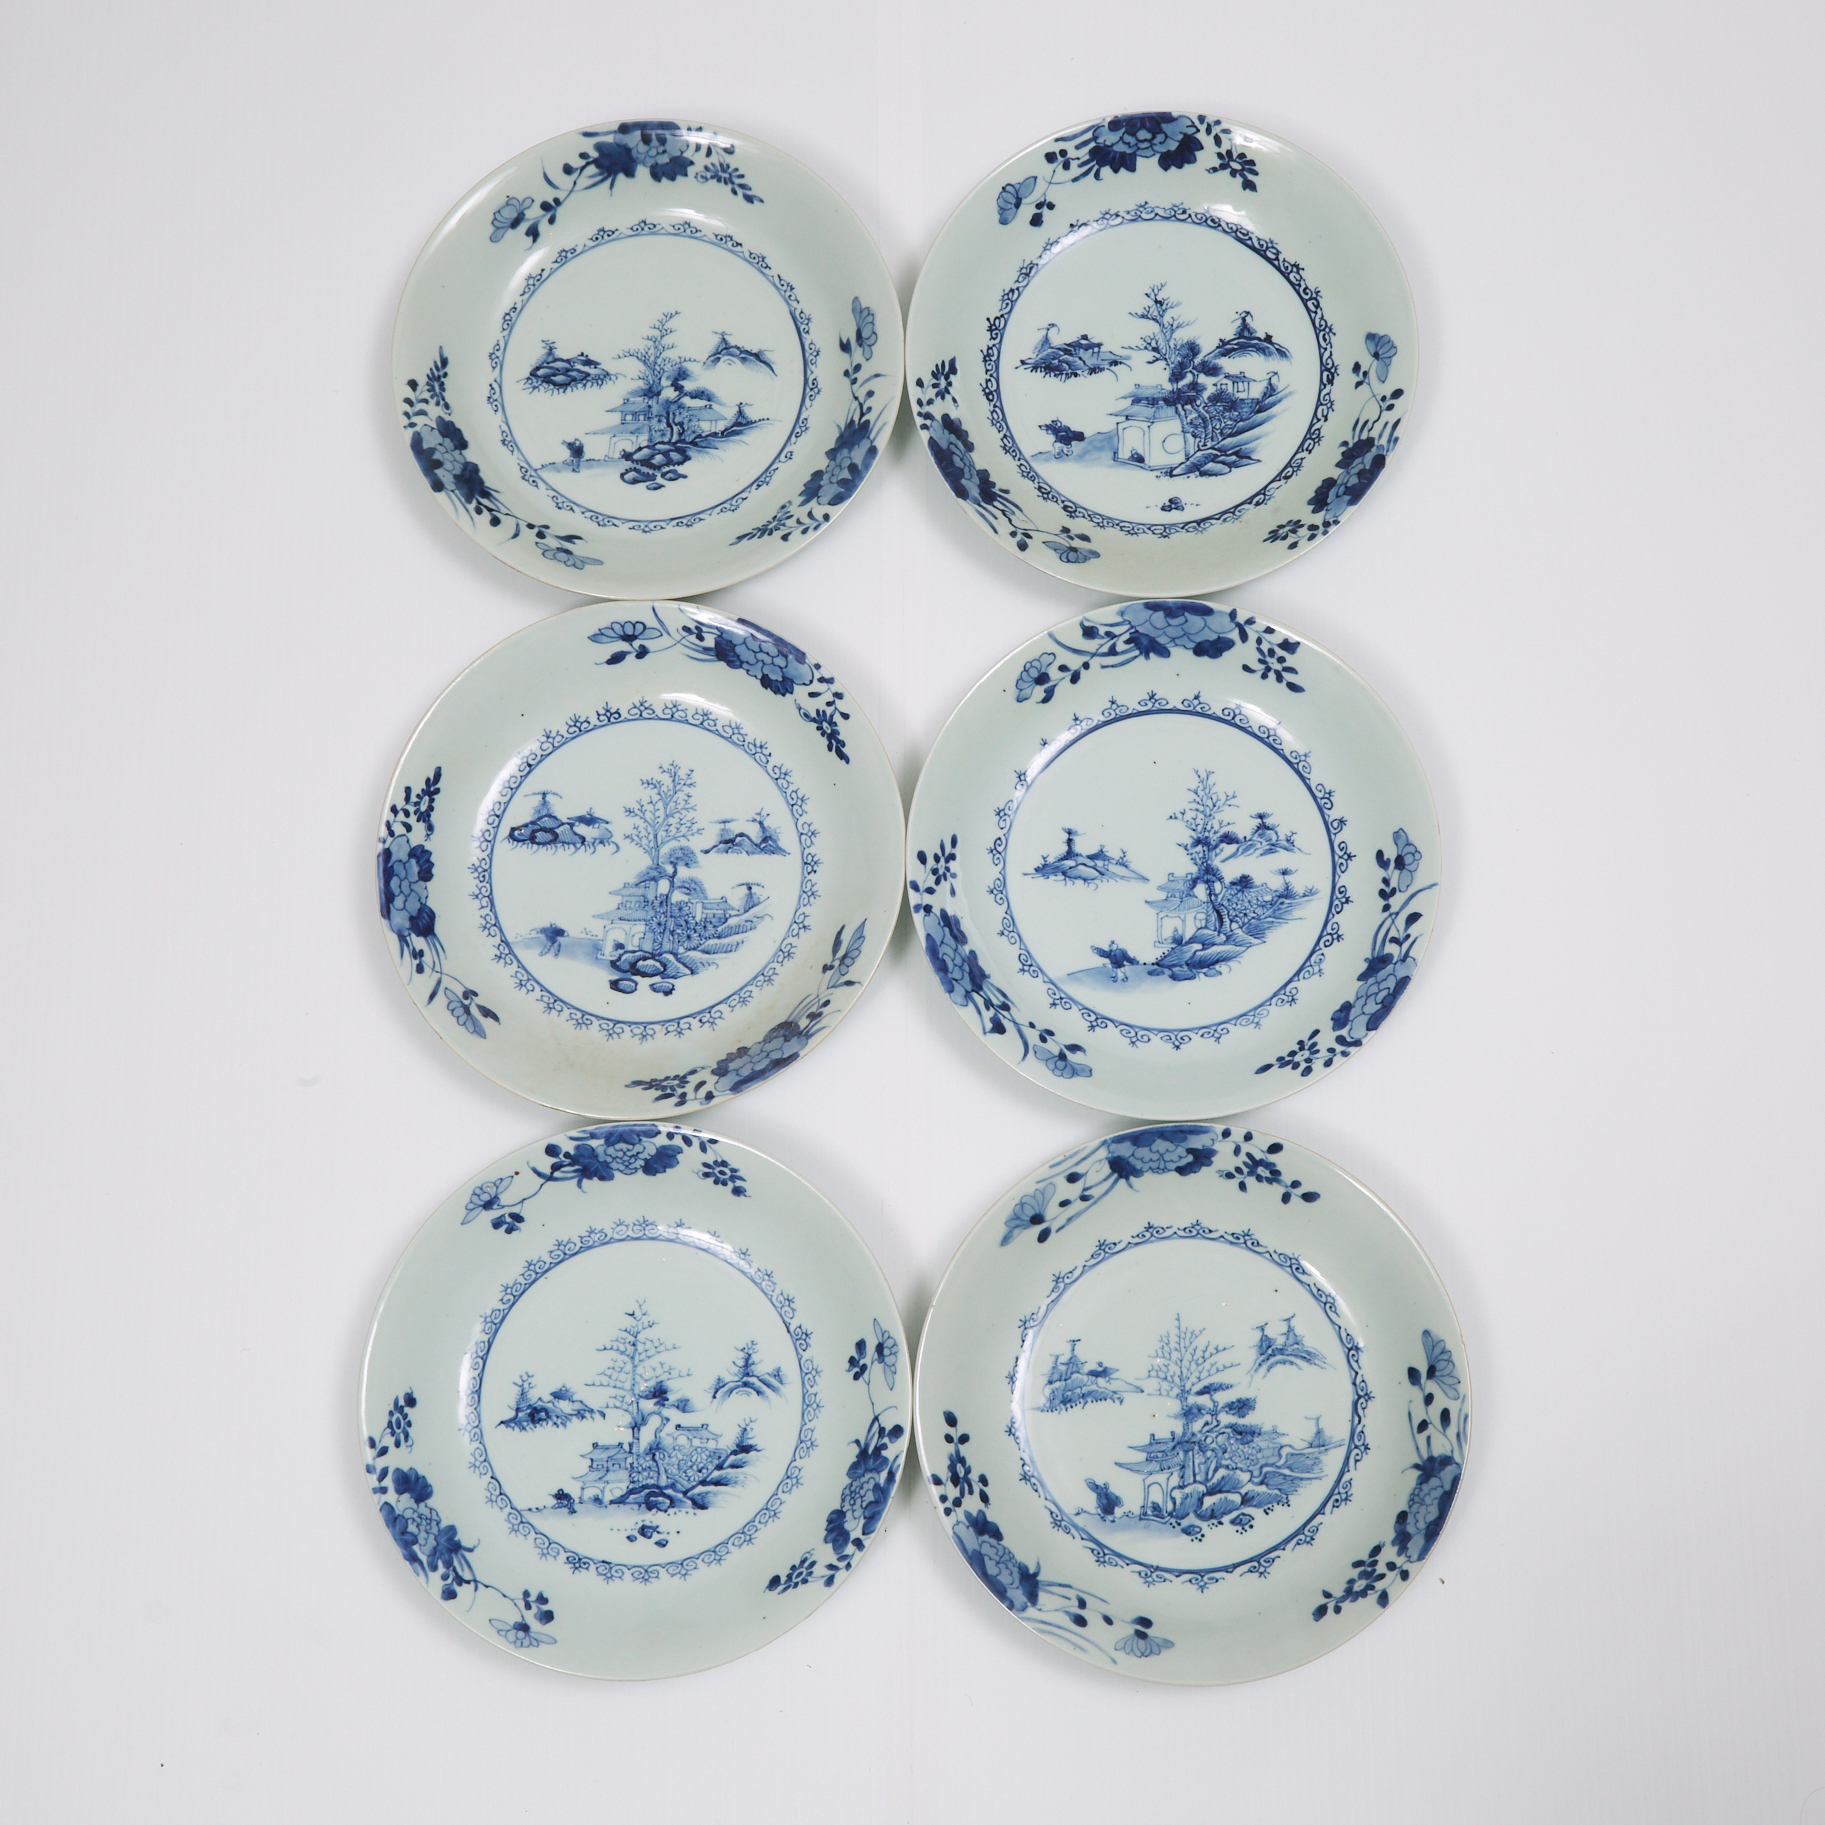 A Set of Six 'Leaping Boy' Pattern Saucer Dishes from the Nanking Cargo, Qianlong Period, Circa 1750